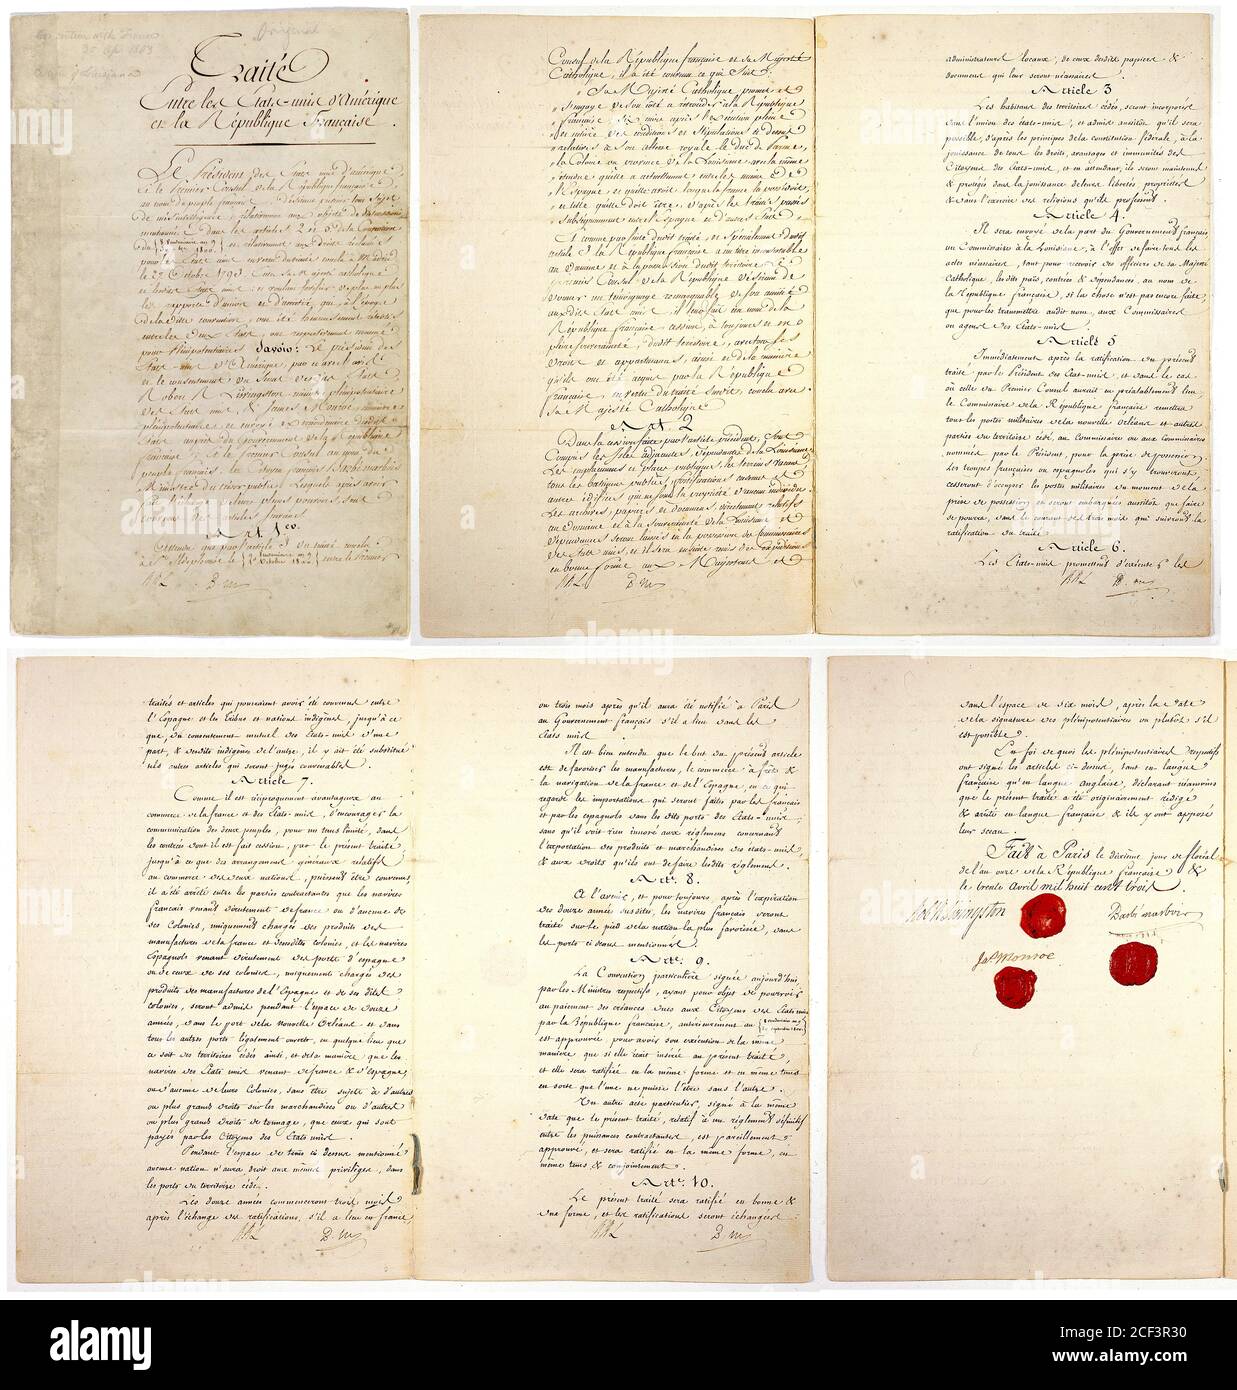 Louisiana Purchase. The original Louisiana Purchase Treaty of April 1803 signed by President James Monroe, François Barbé-Marbois and US Minister to France, Robert Livingston Stock Photo